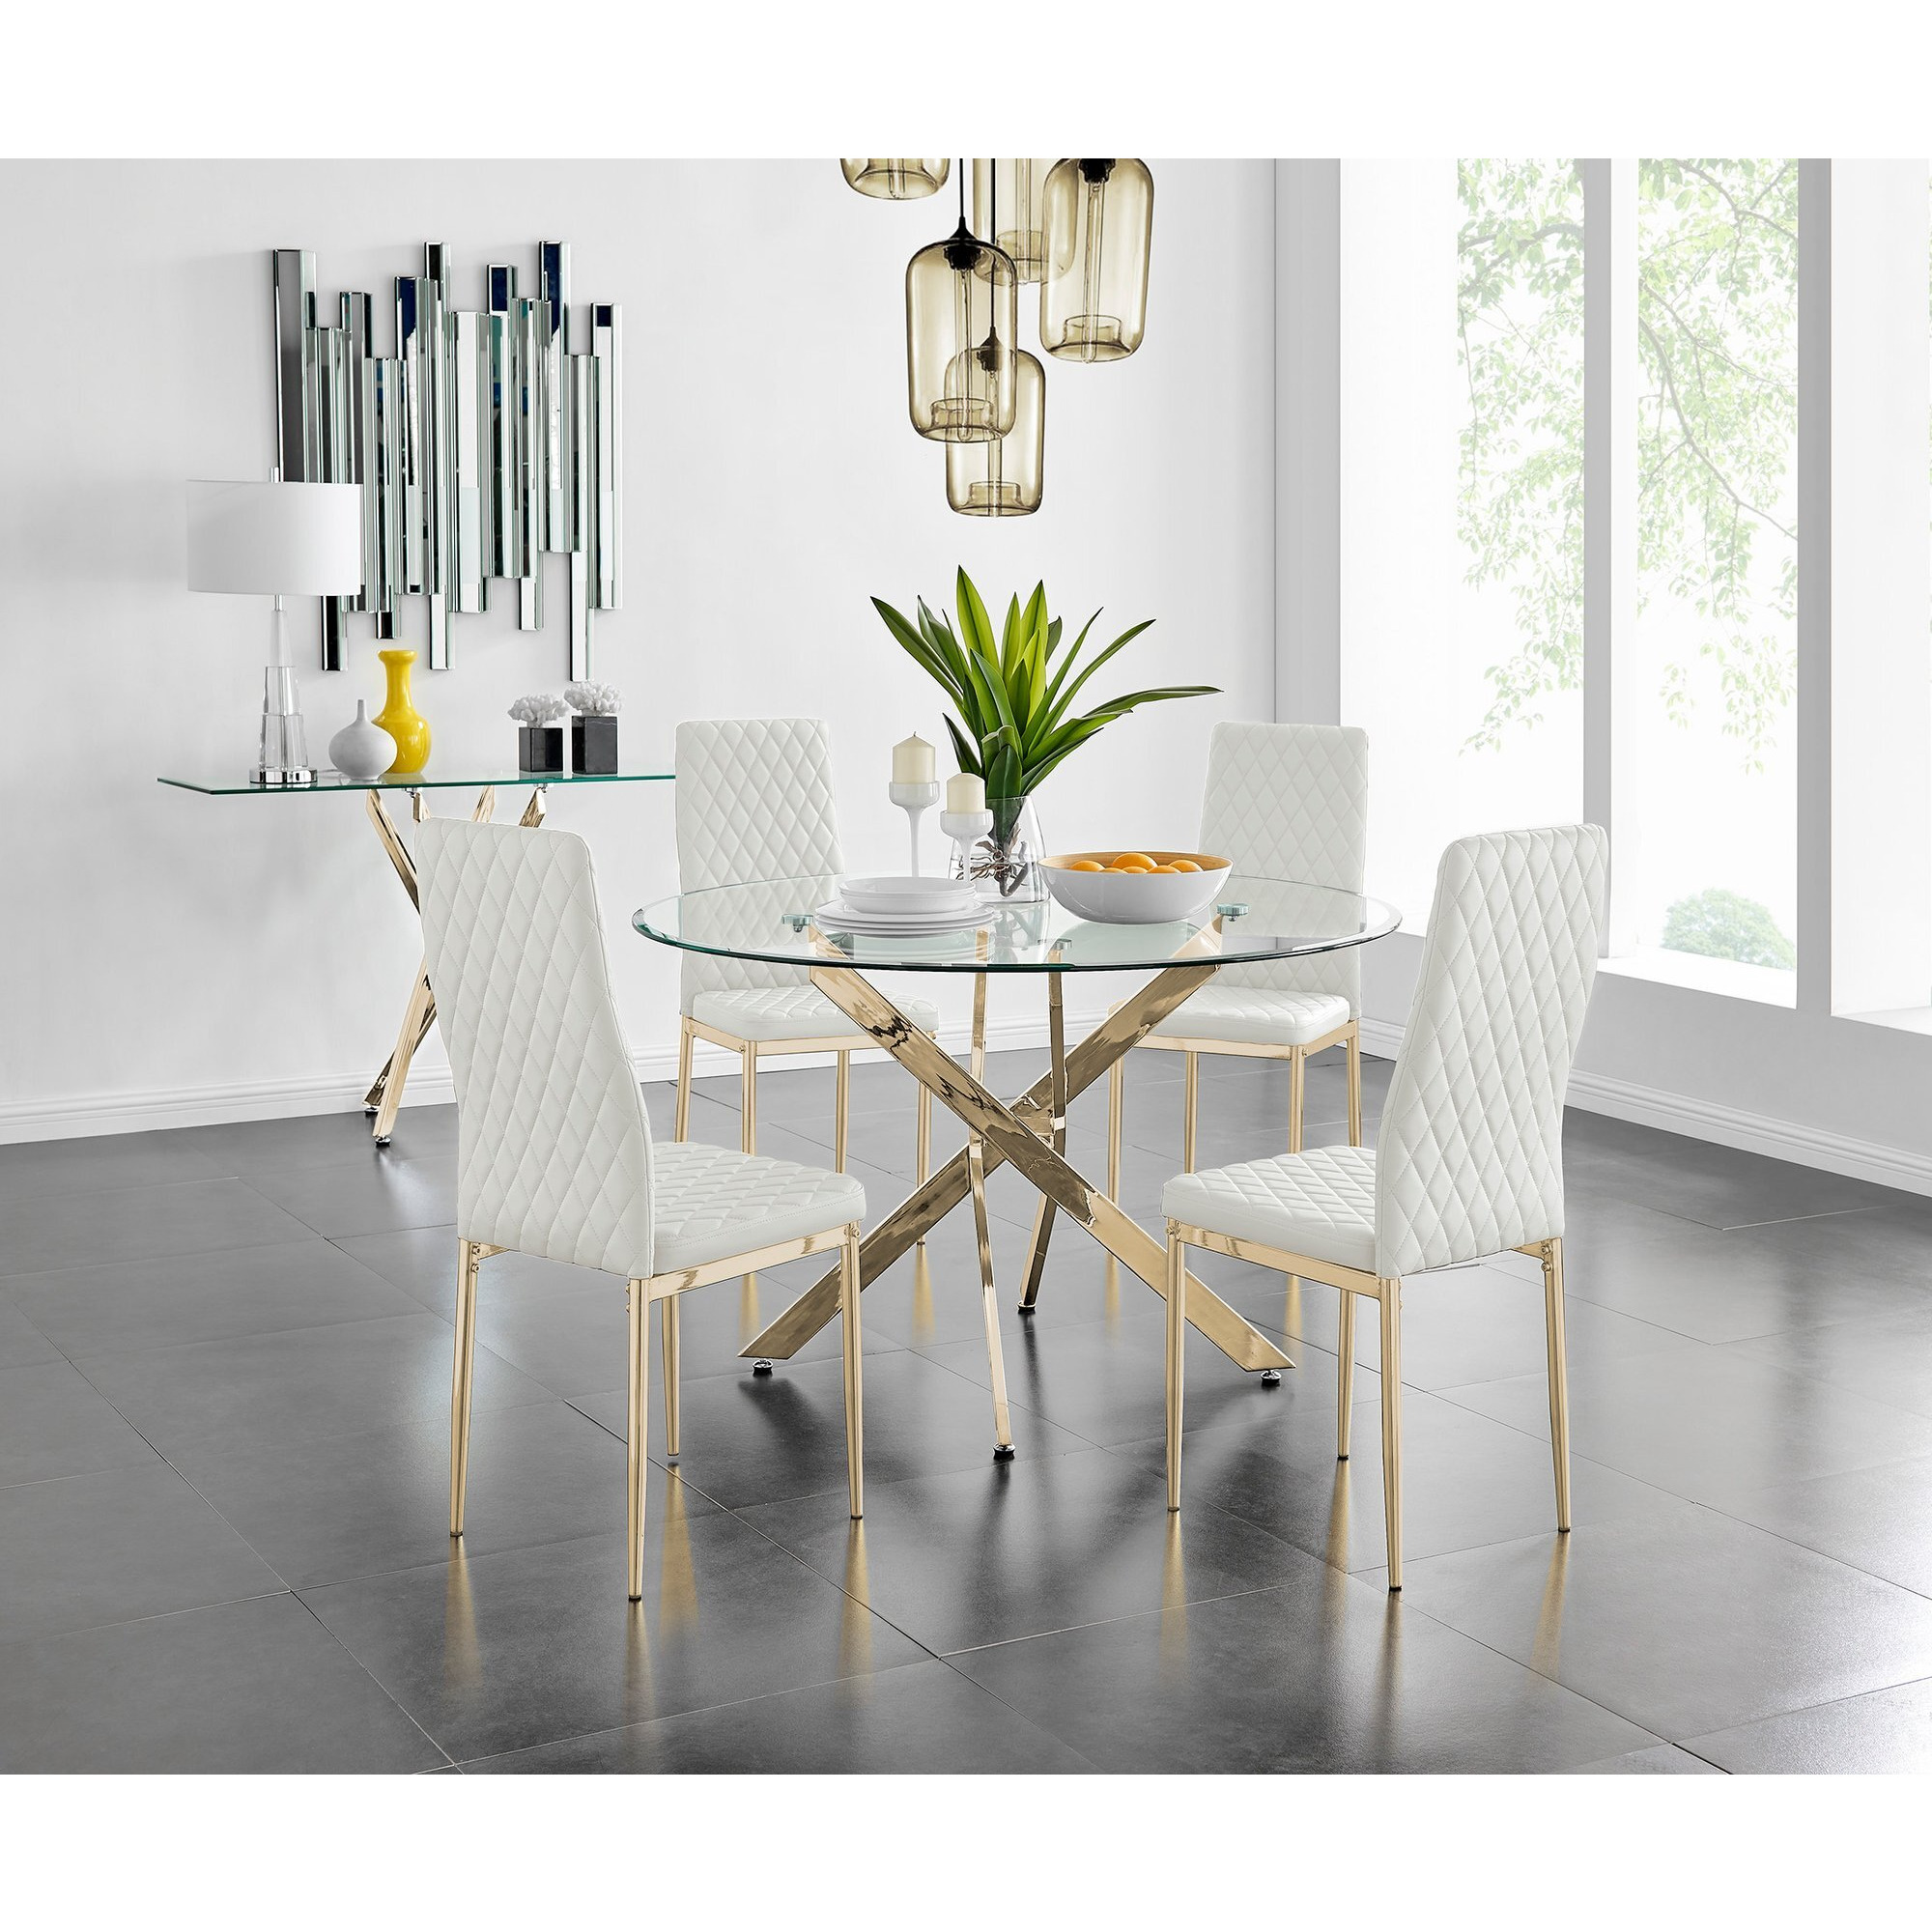 Novara 120cm Gold Round Dining Table and 4 Gold Leg Milan Chairs